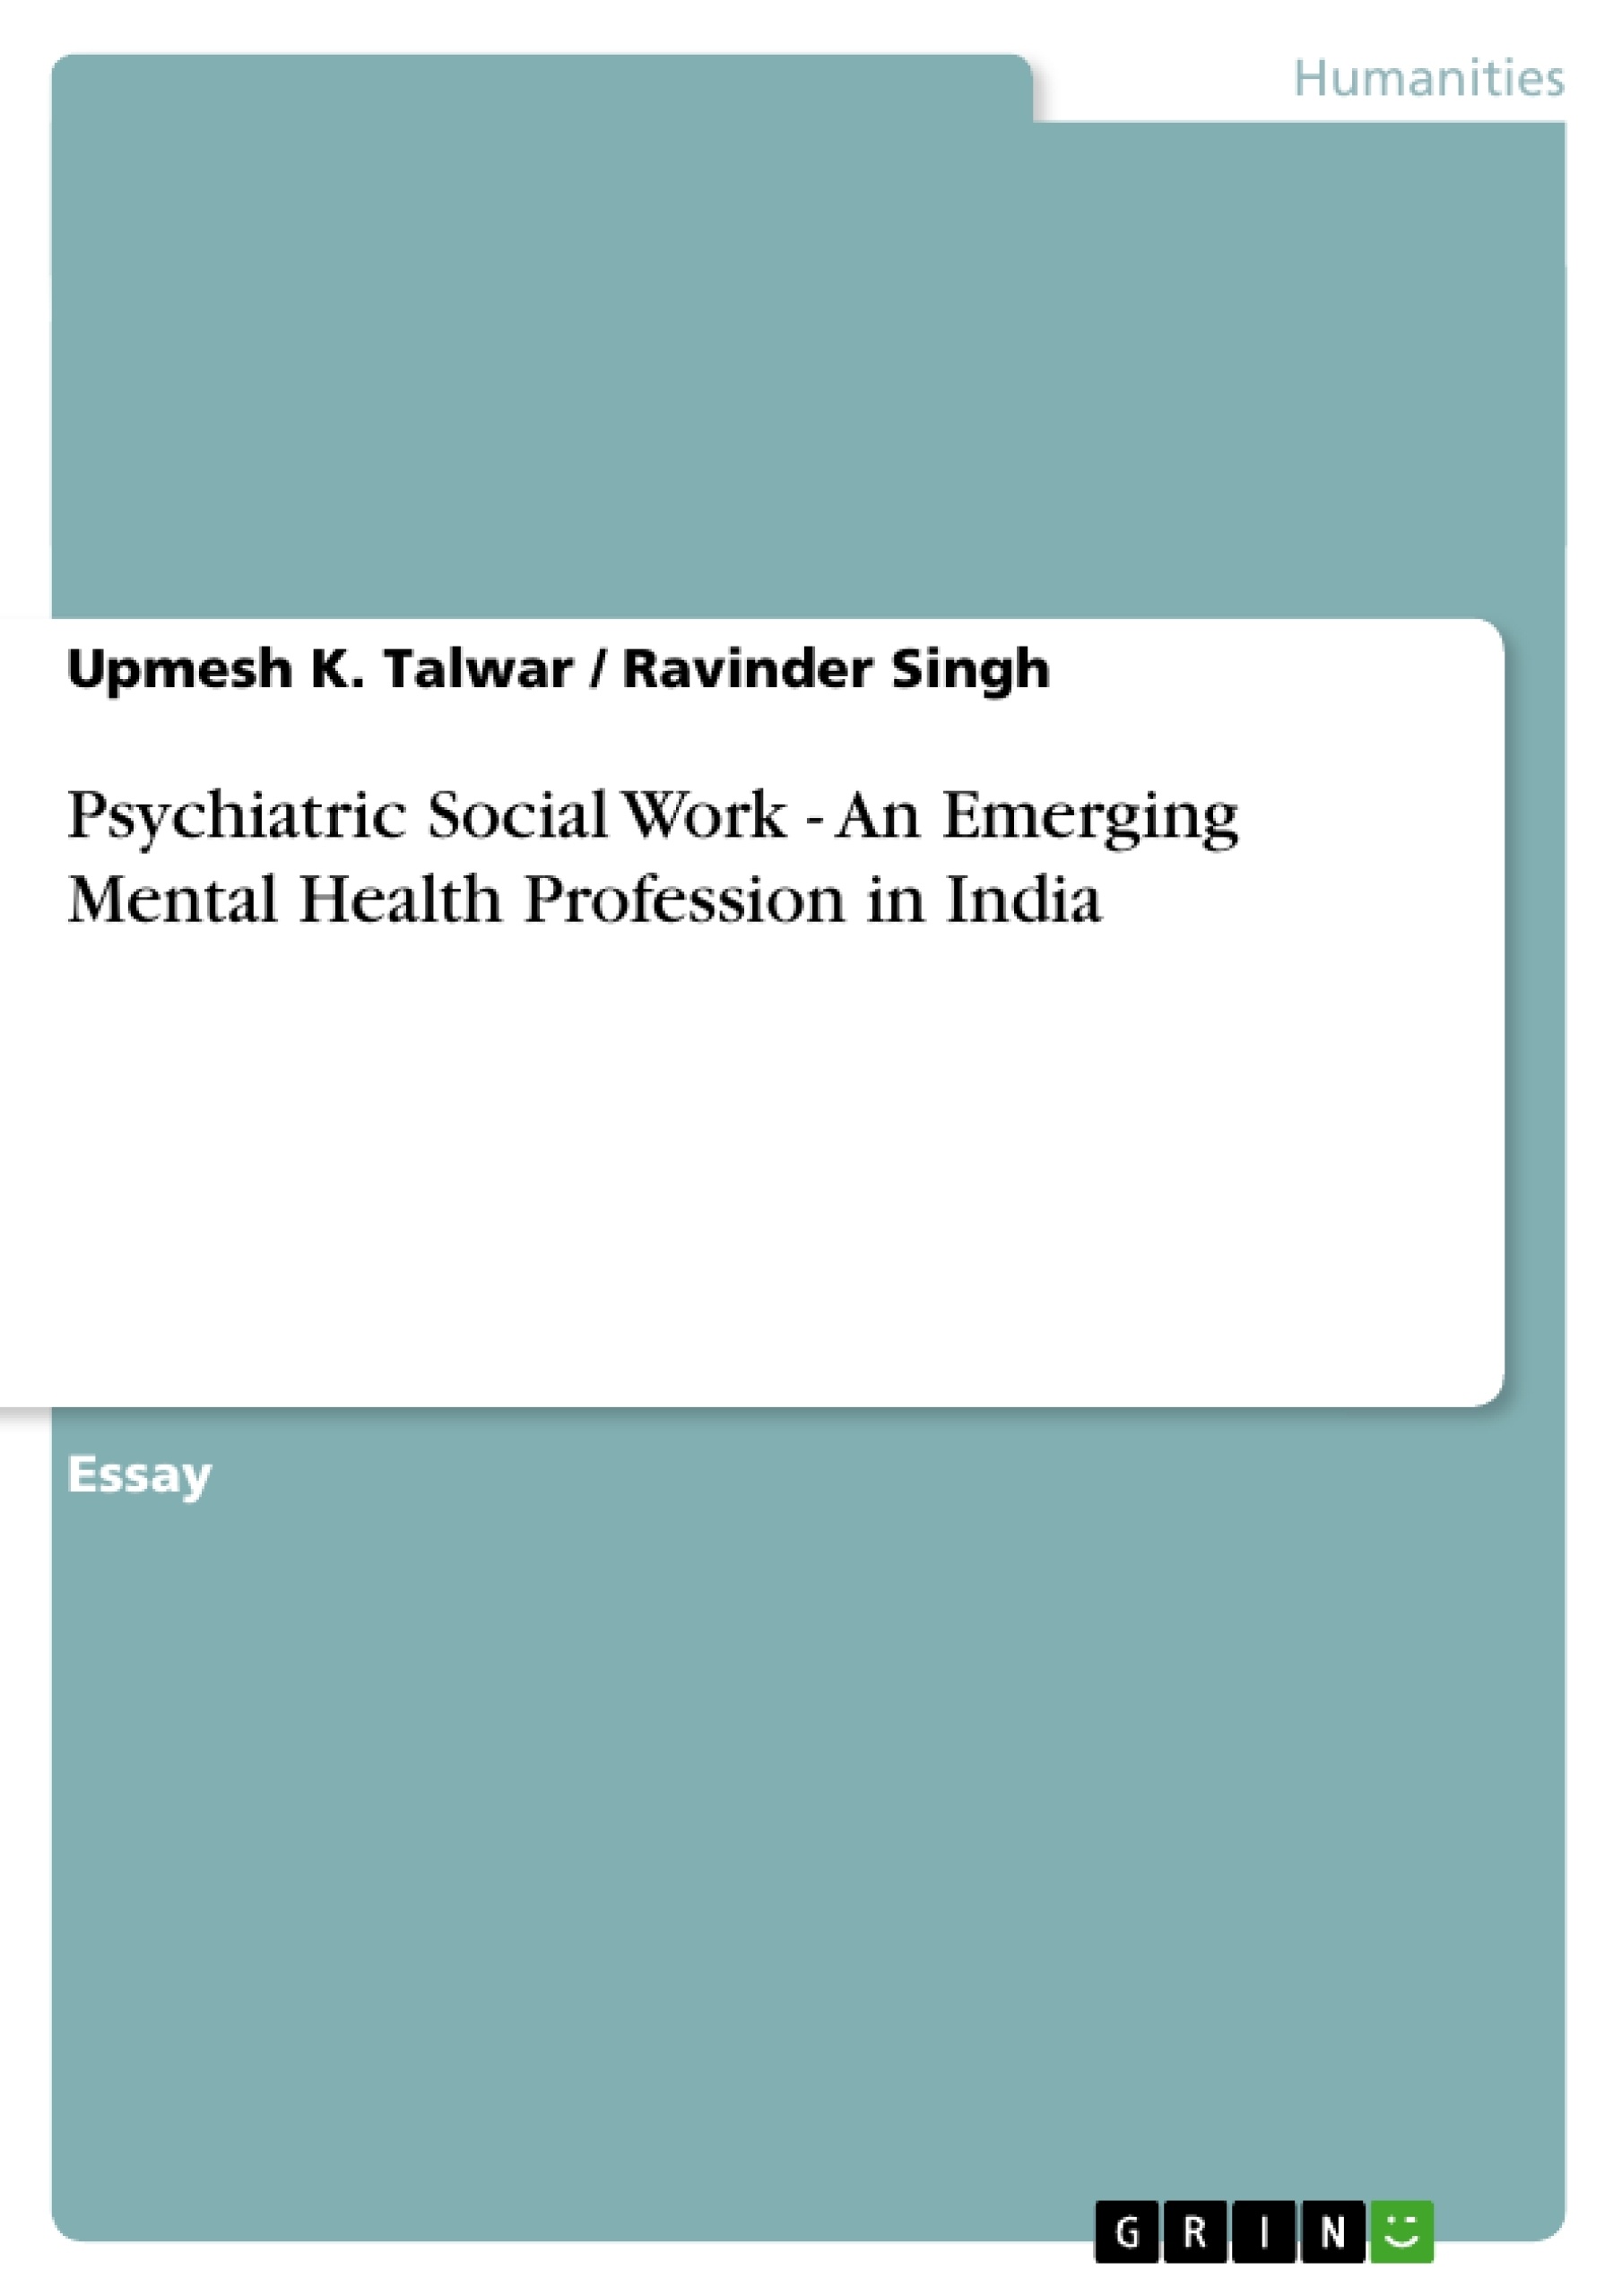 Titre: Psychiatric Social Work - An Emerging Mental Health Profession in India